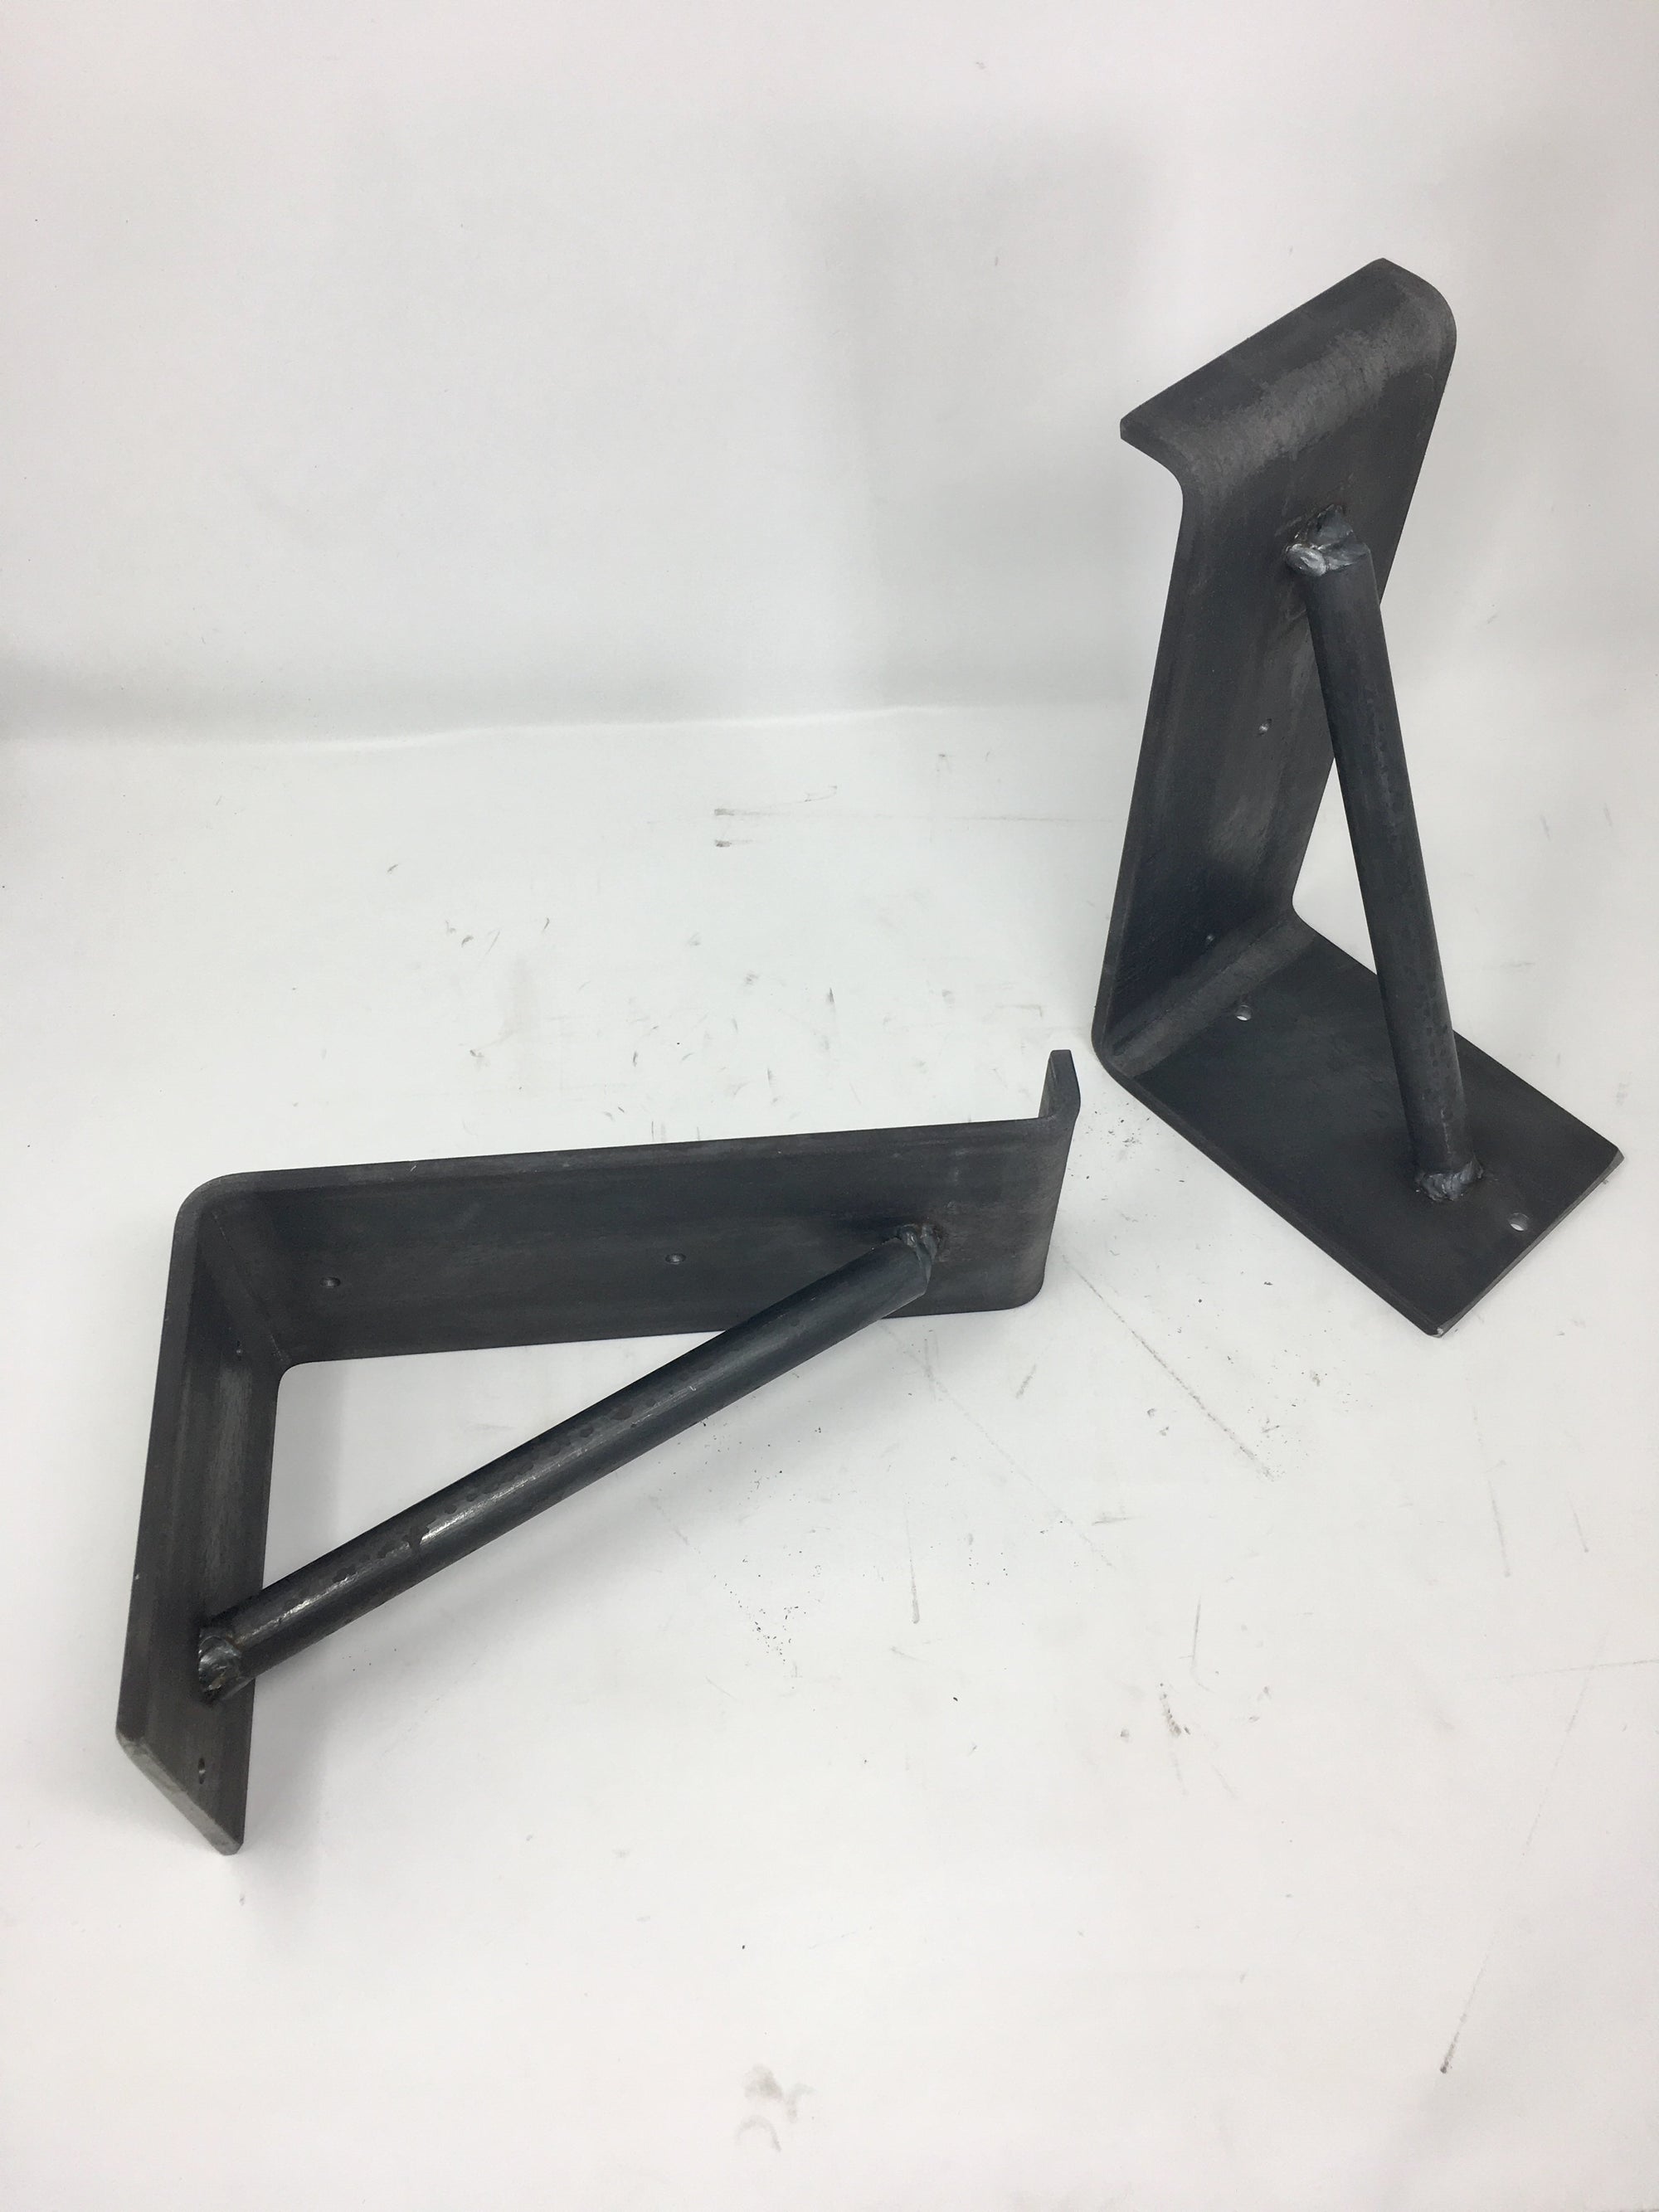 The Shaver Open Shelving Support